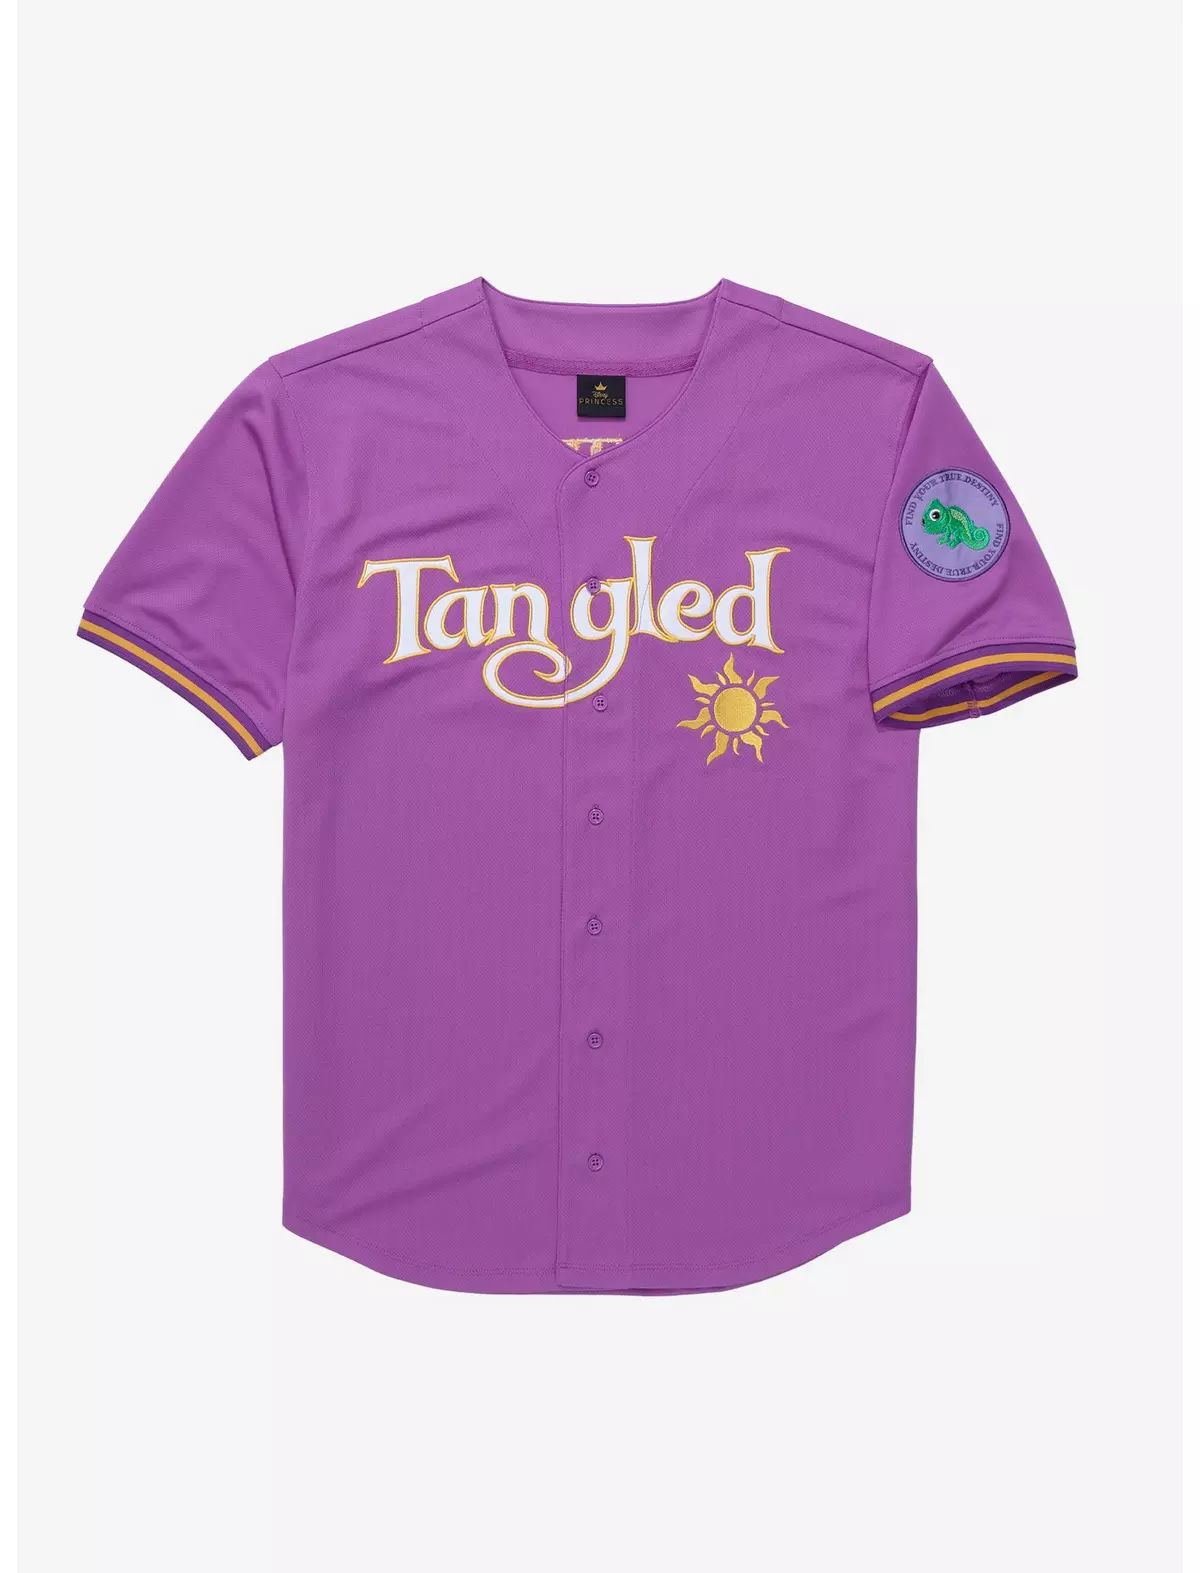 Disney Tangled Rapunzel Baseball Jersey - BoxLunch Exclusive | BoxLunch